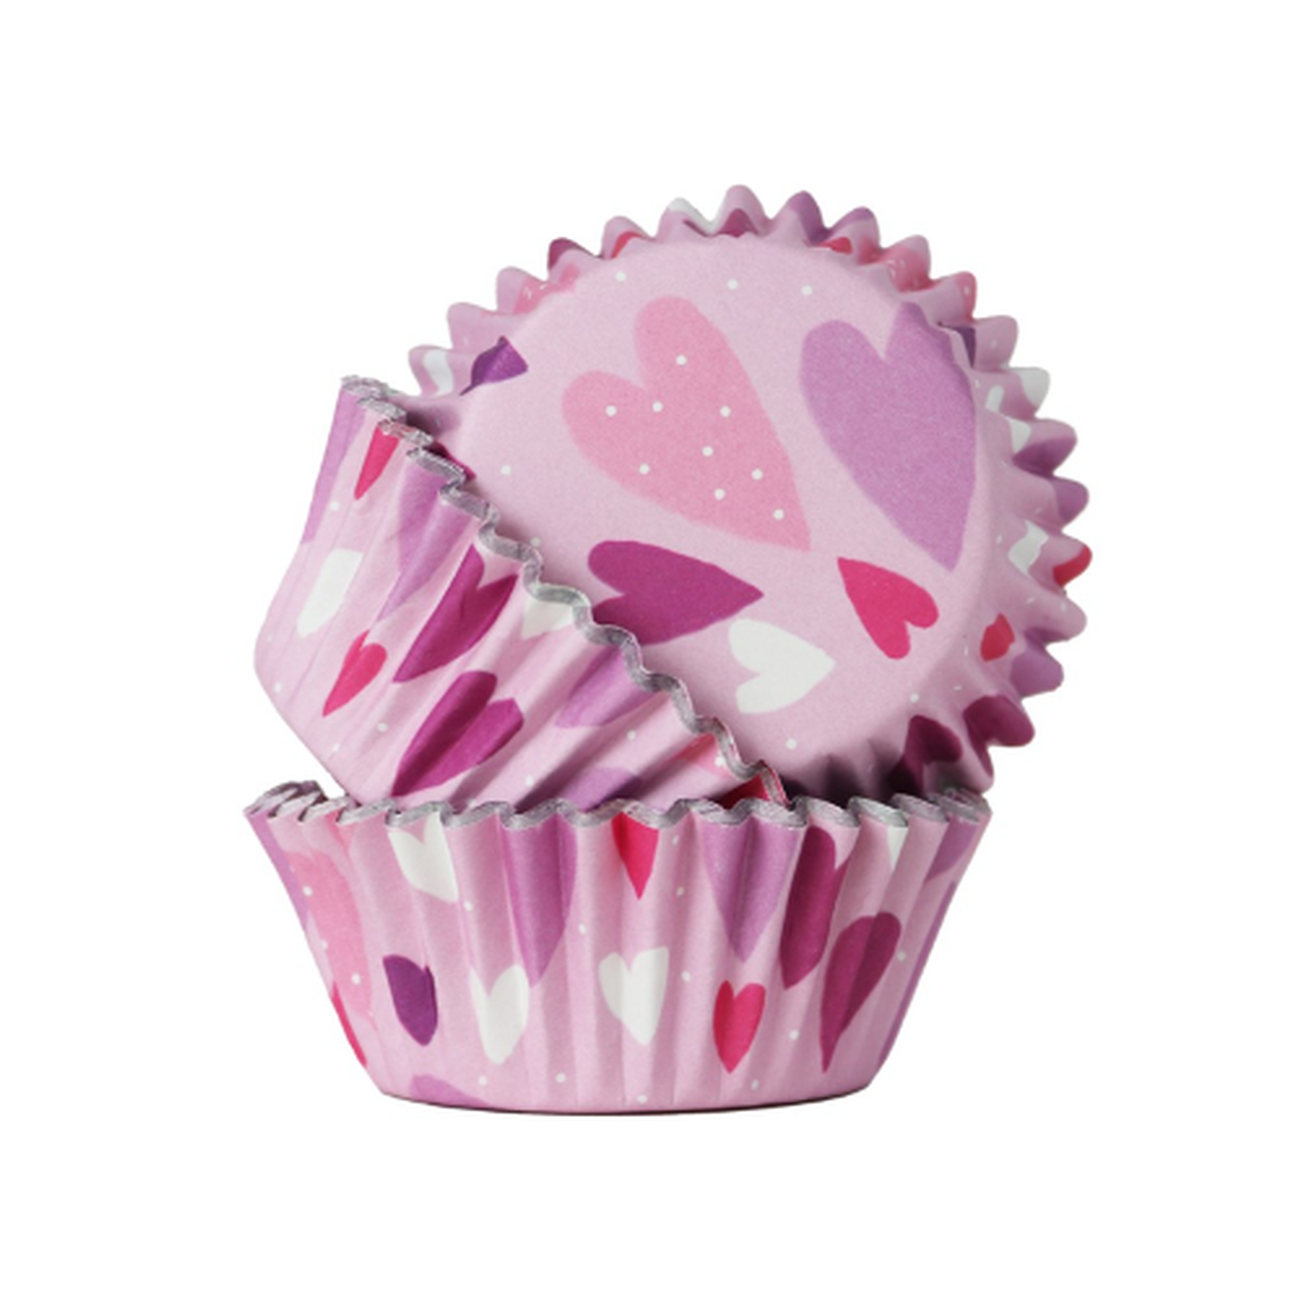 https://www.thekitchenwhisk.ie/contentfiles/productImages/Large/pme-30-love-heart-foil-lined-baking-cases-2.png